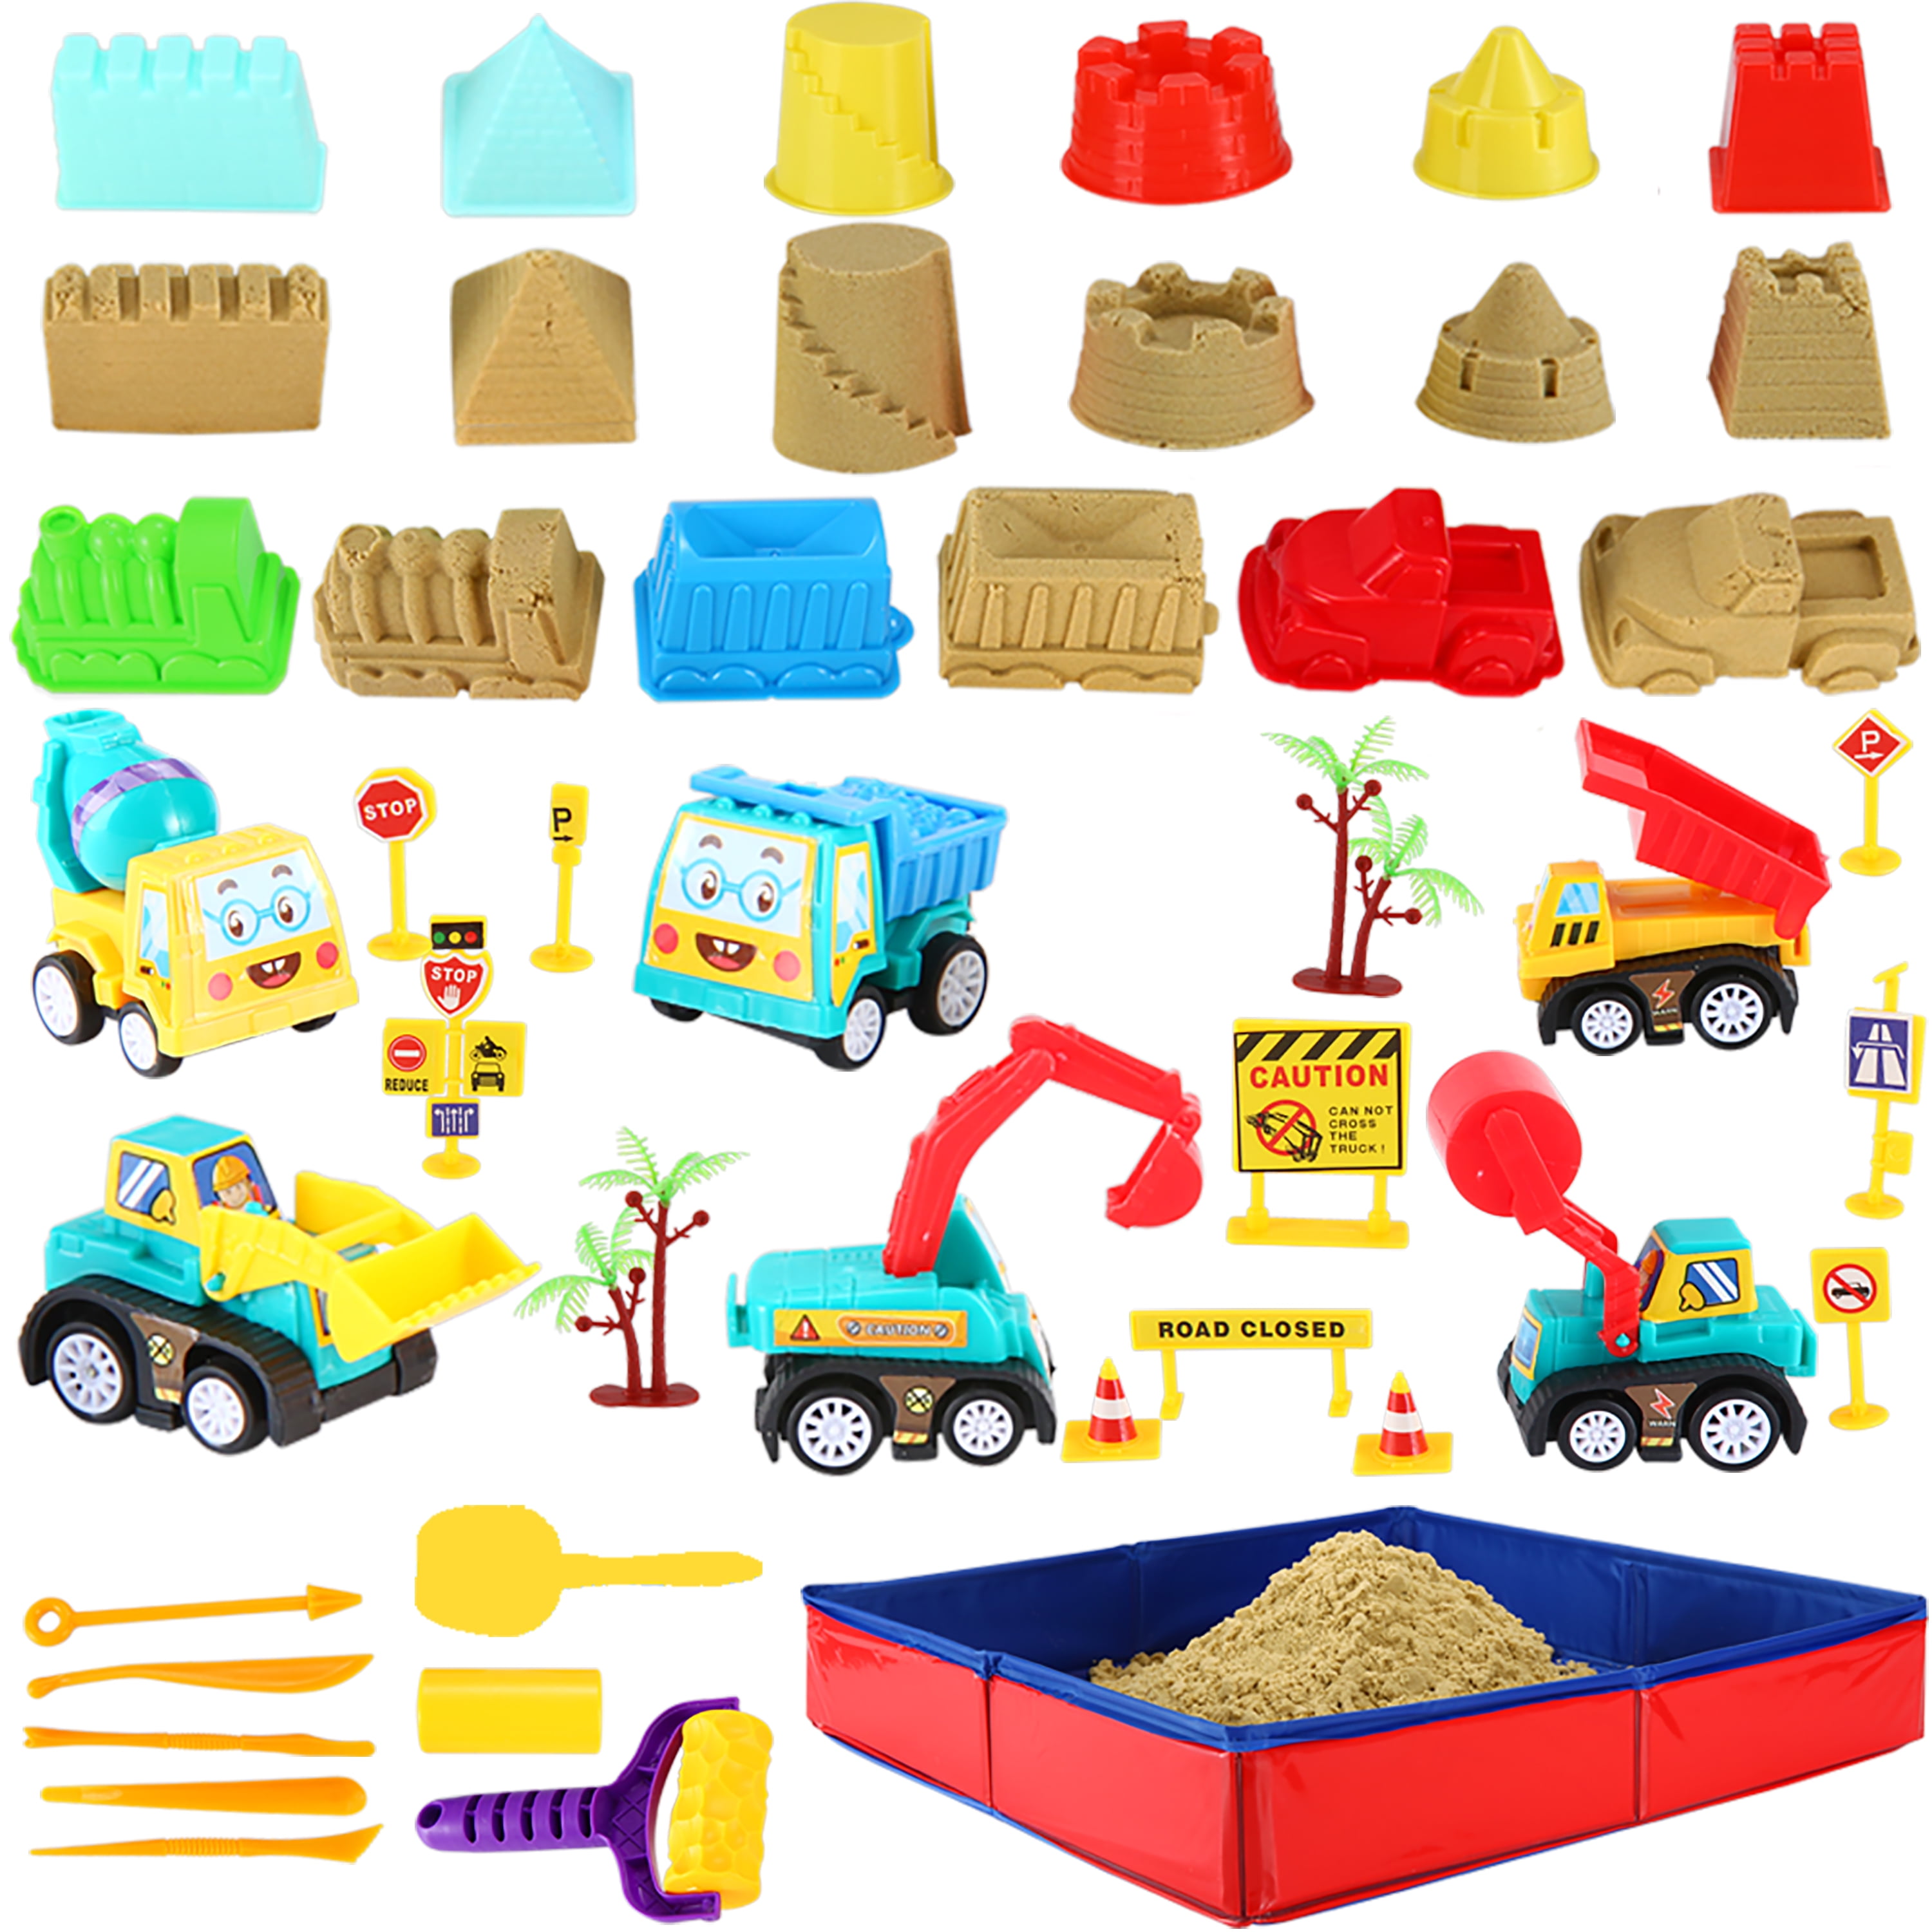 Construction Moving Sand Kit 2lbs Play Sand Tools Trucks Road Signs Foldable Box 